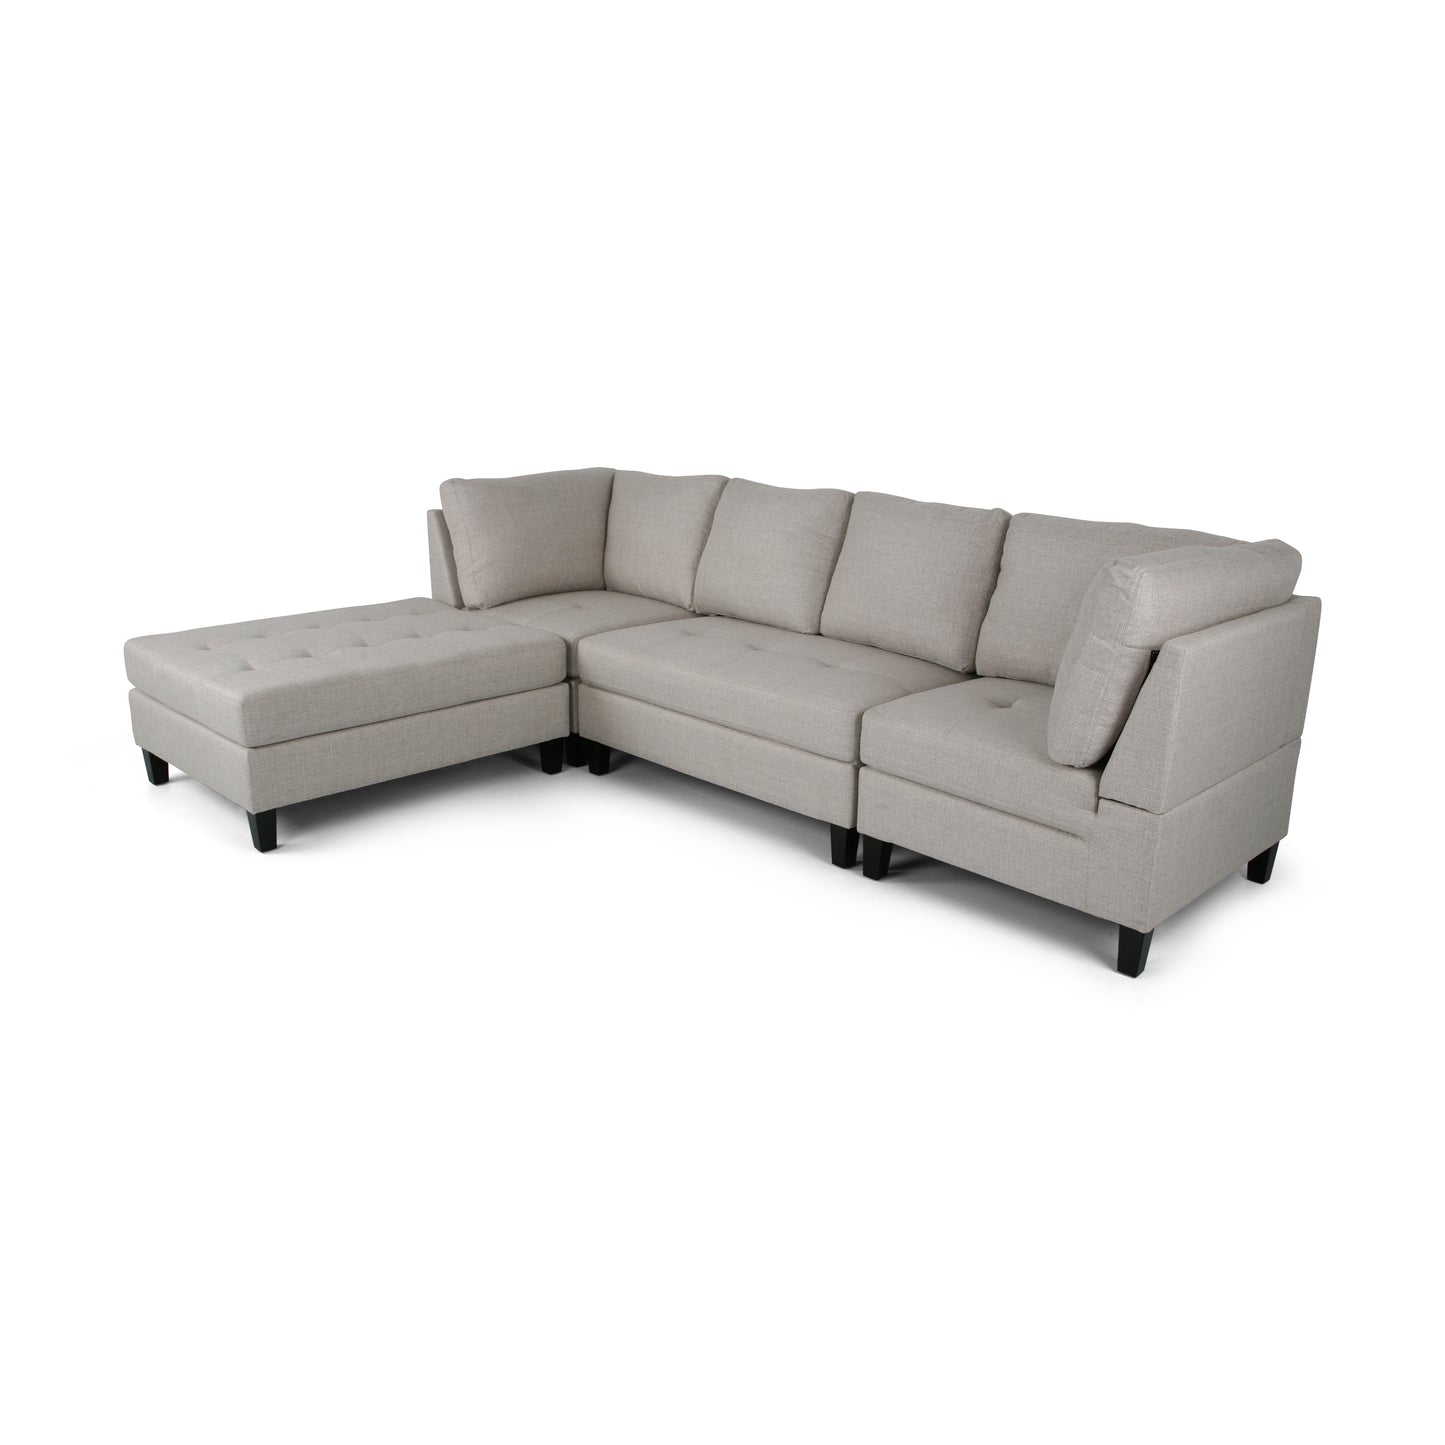 Daylon Contemporary Fabric Sectional Sofa with Ottoman